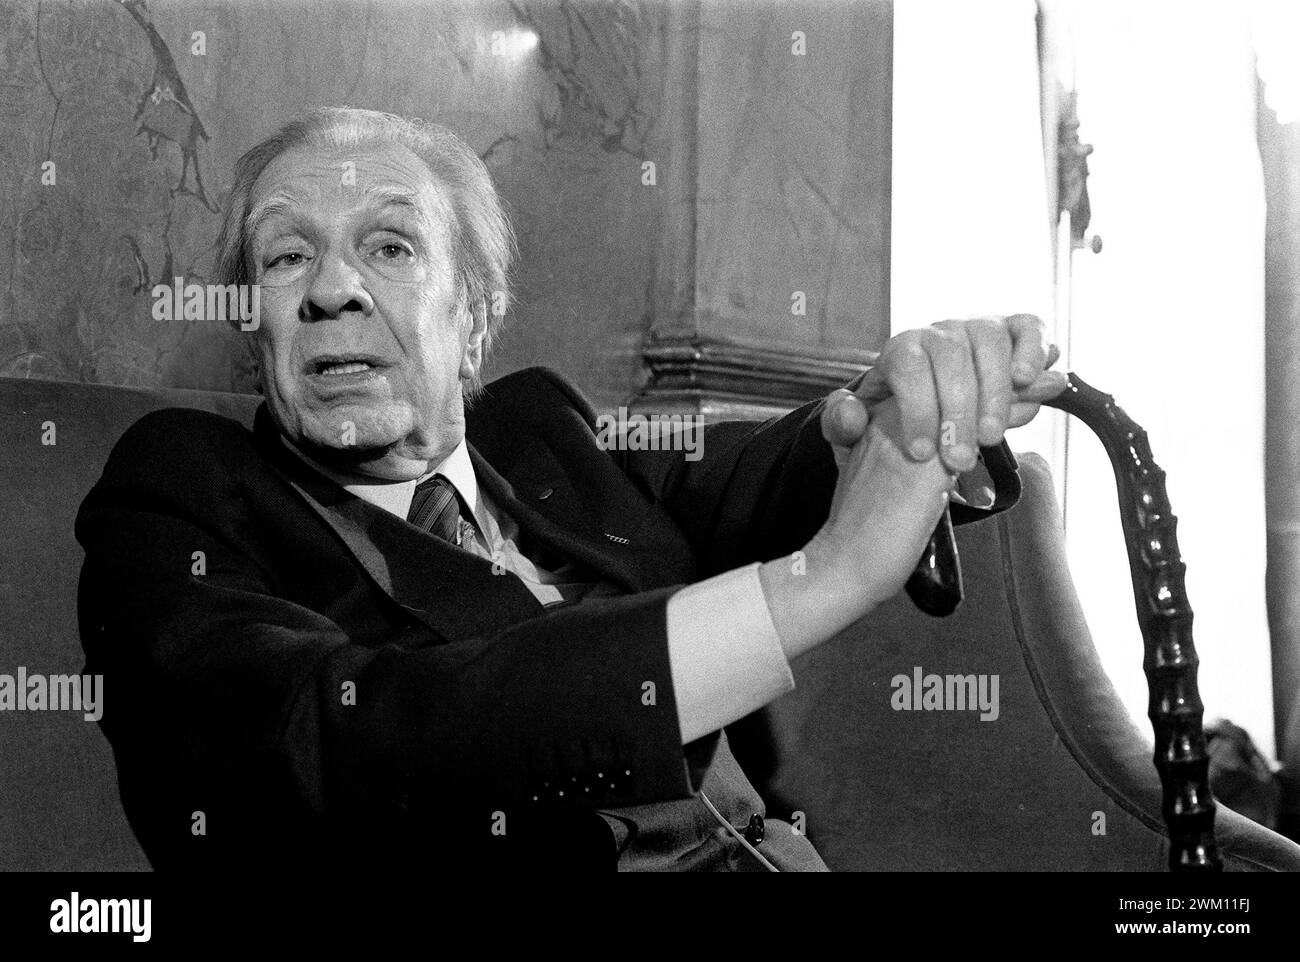 3825284 Jorge Luis Borges; (add.info.: Rome, Westin Excelsior Hotel, 1981. Argentinian writer Jorge Luis Borges / Roma, Hotel Westin Excelsior, 1981. Lo scrittore argentino Jorge Luis Borges); © Marcello Mencarini. All rights reserved 2024. Stock Photo